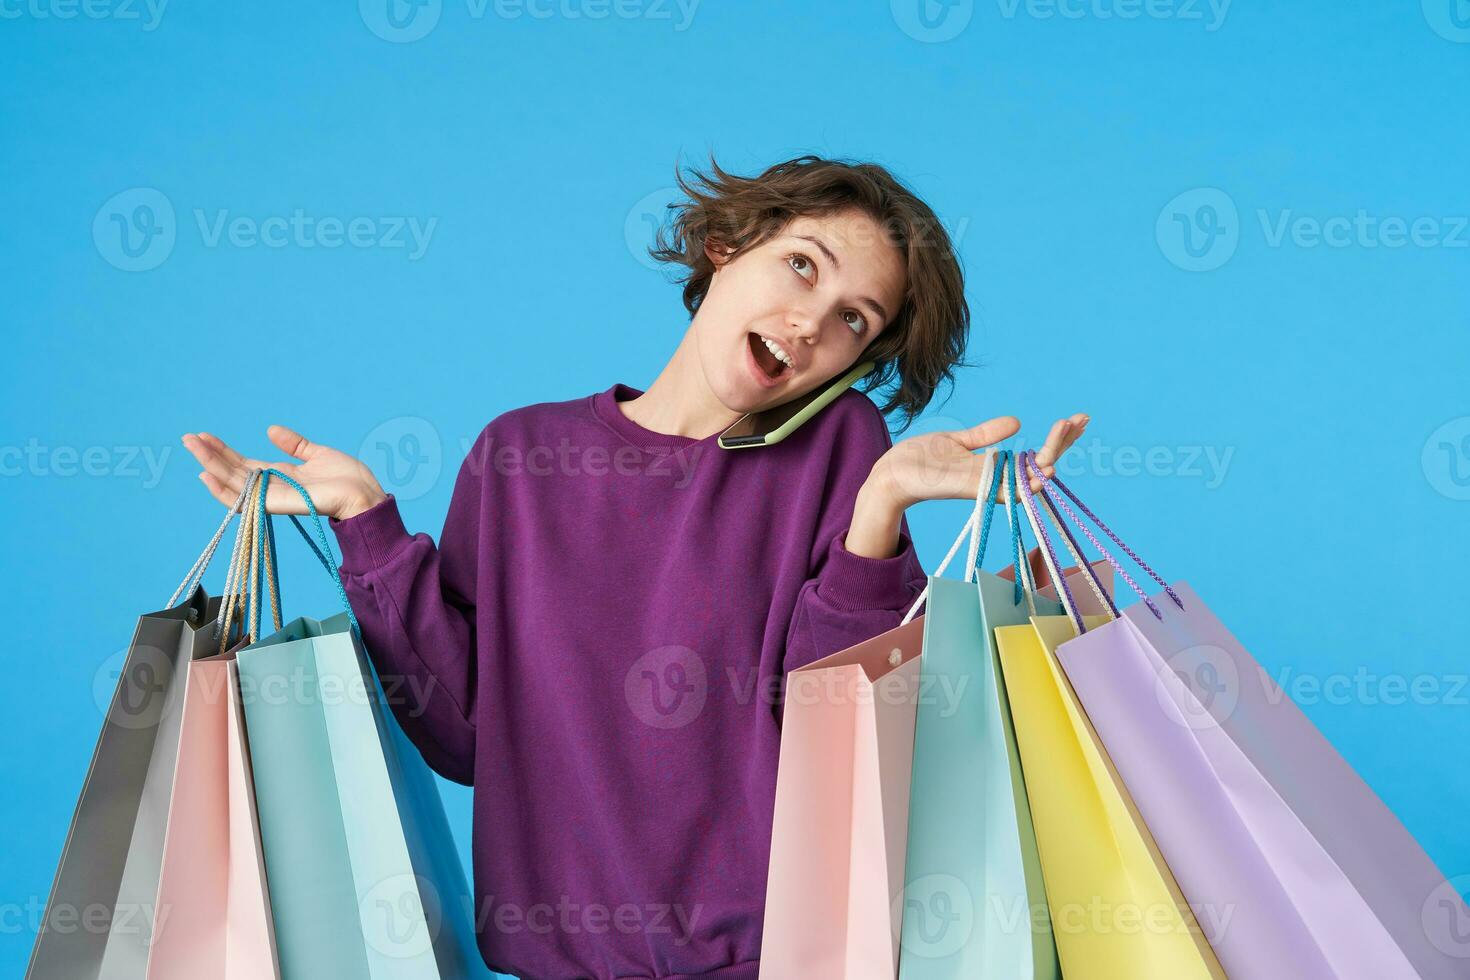 Indoor shot of young pretty curly brunette woman with short haircut making call with her smartphone while shopping, keeping paper bags in raised hands, isolated over blue background photo